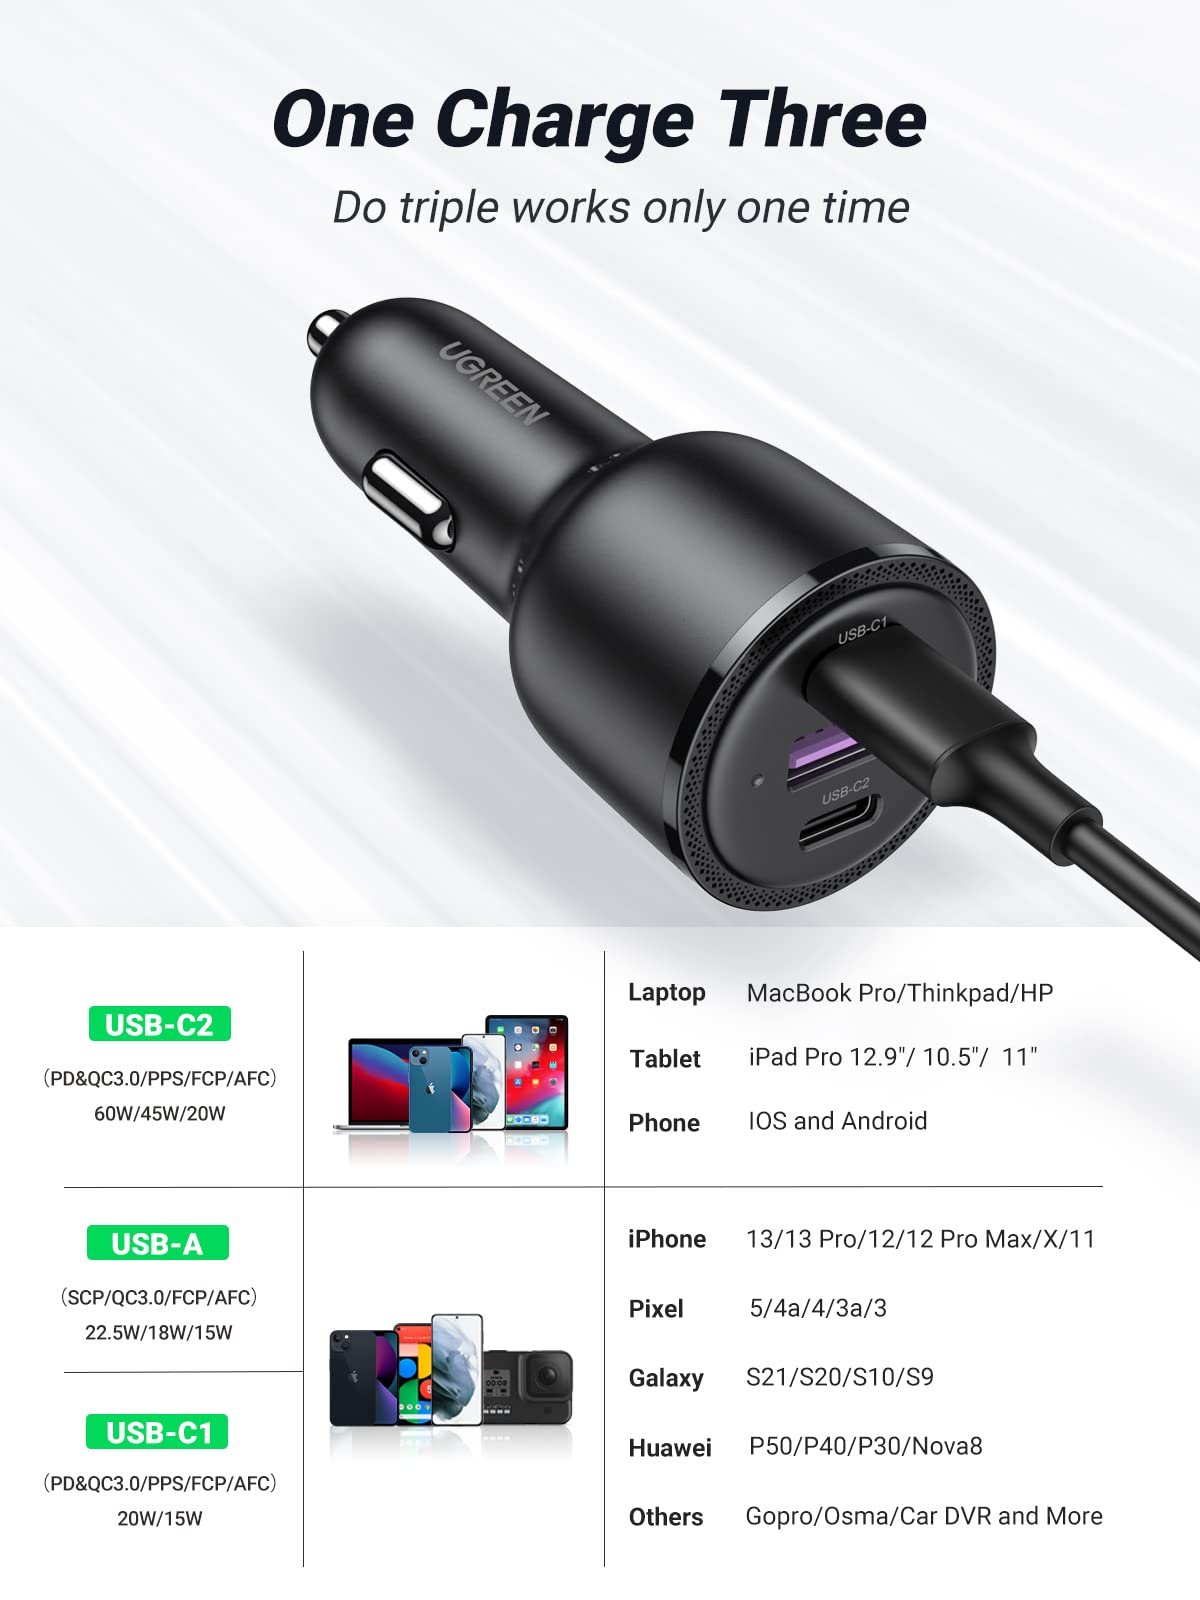 130W USB C PD Car Charger by UGREEN - Fast Charges iPhone, iPad, MacBook